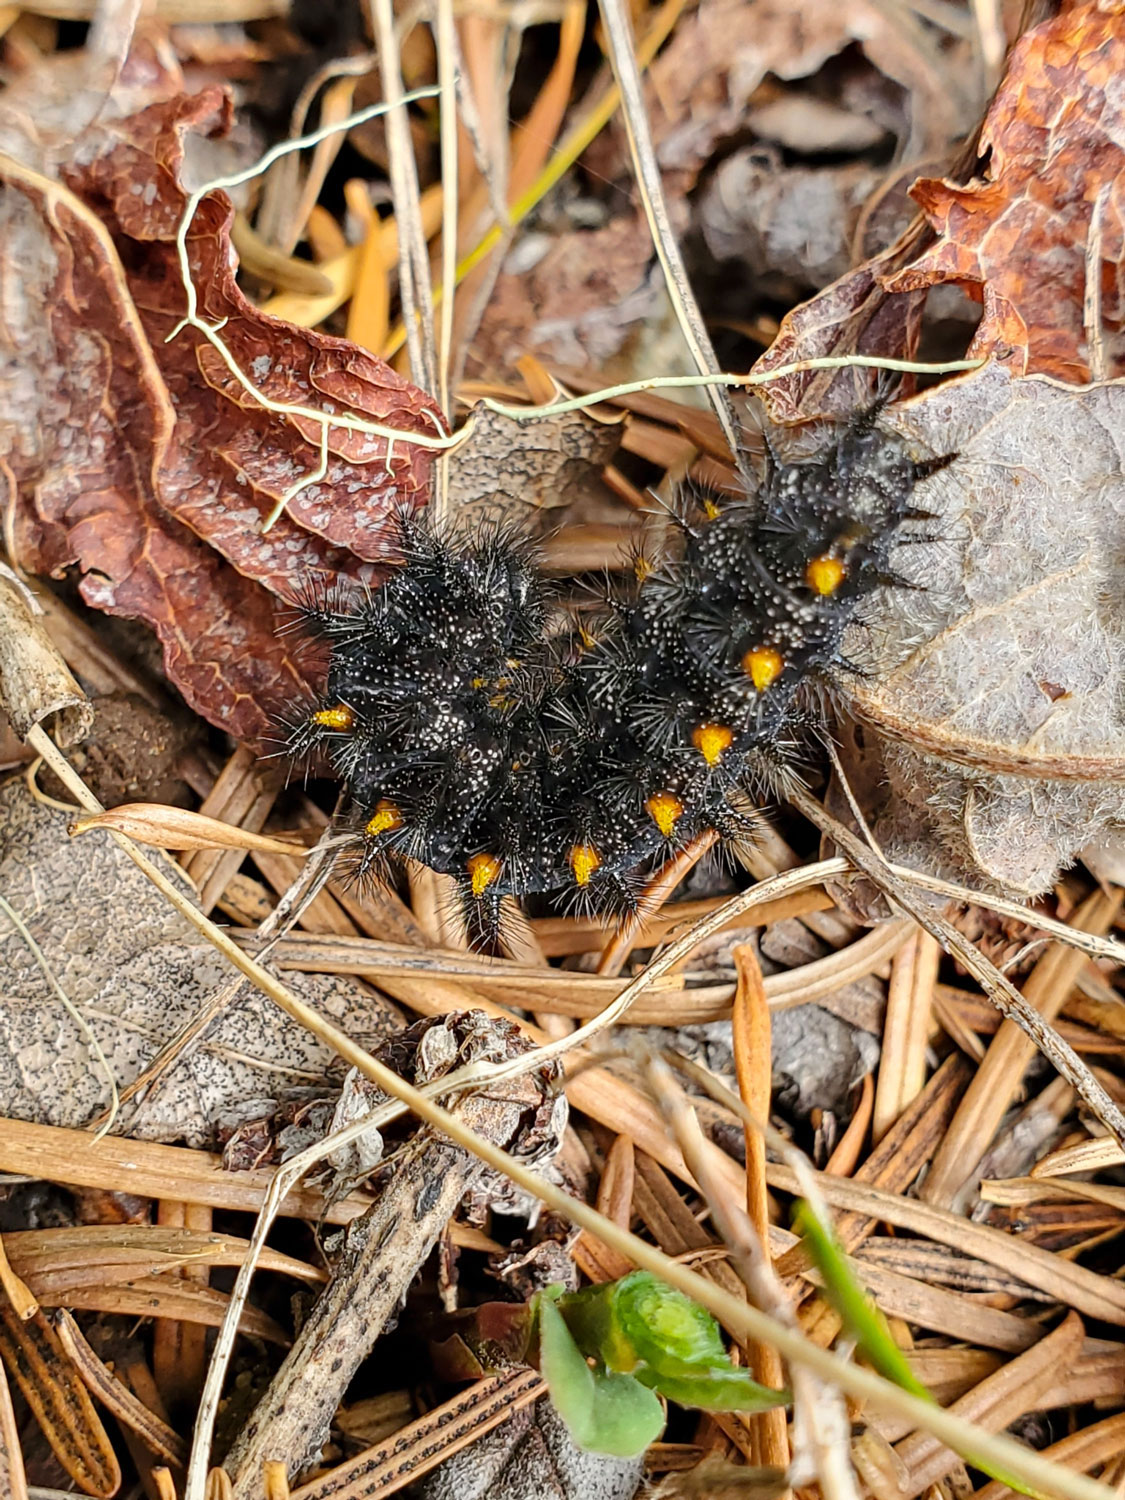 A fuzzy and spiky black and yellow caterpillar crawling over dried leaves and other detritus.